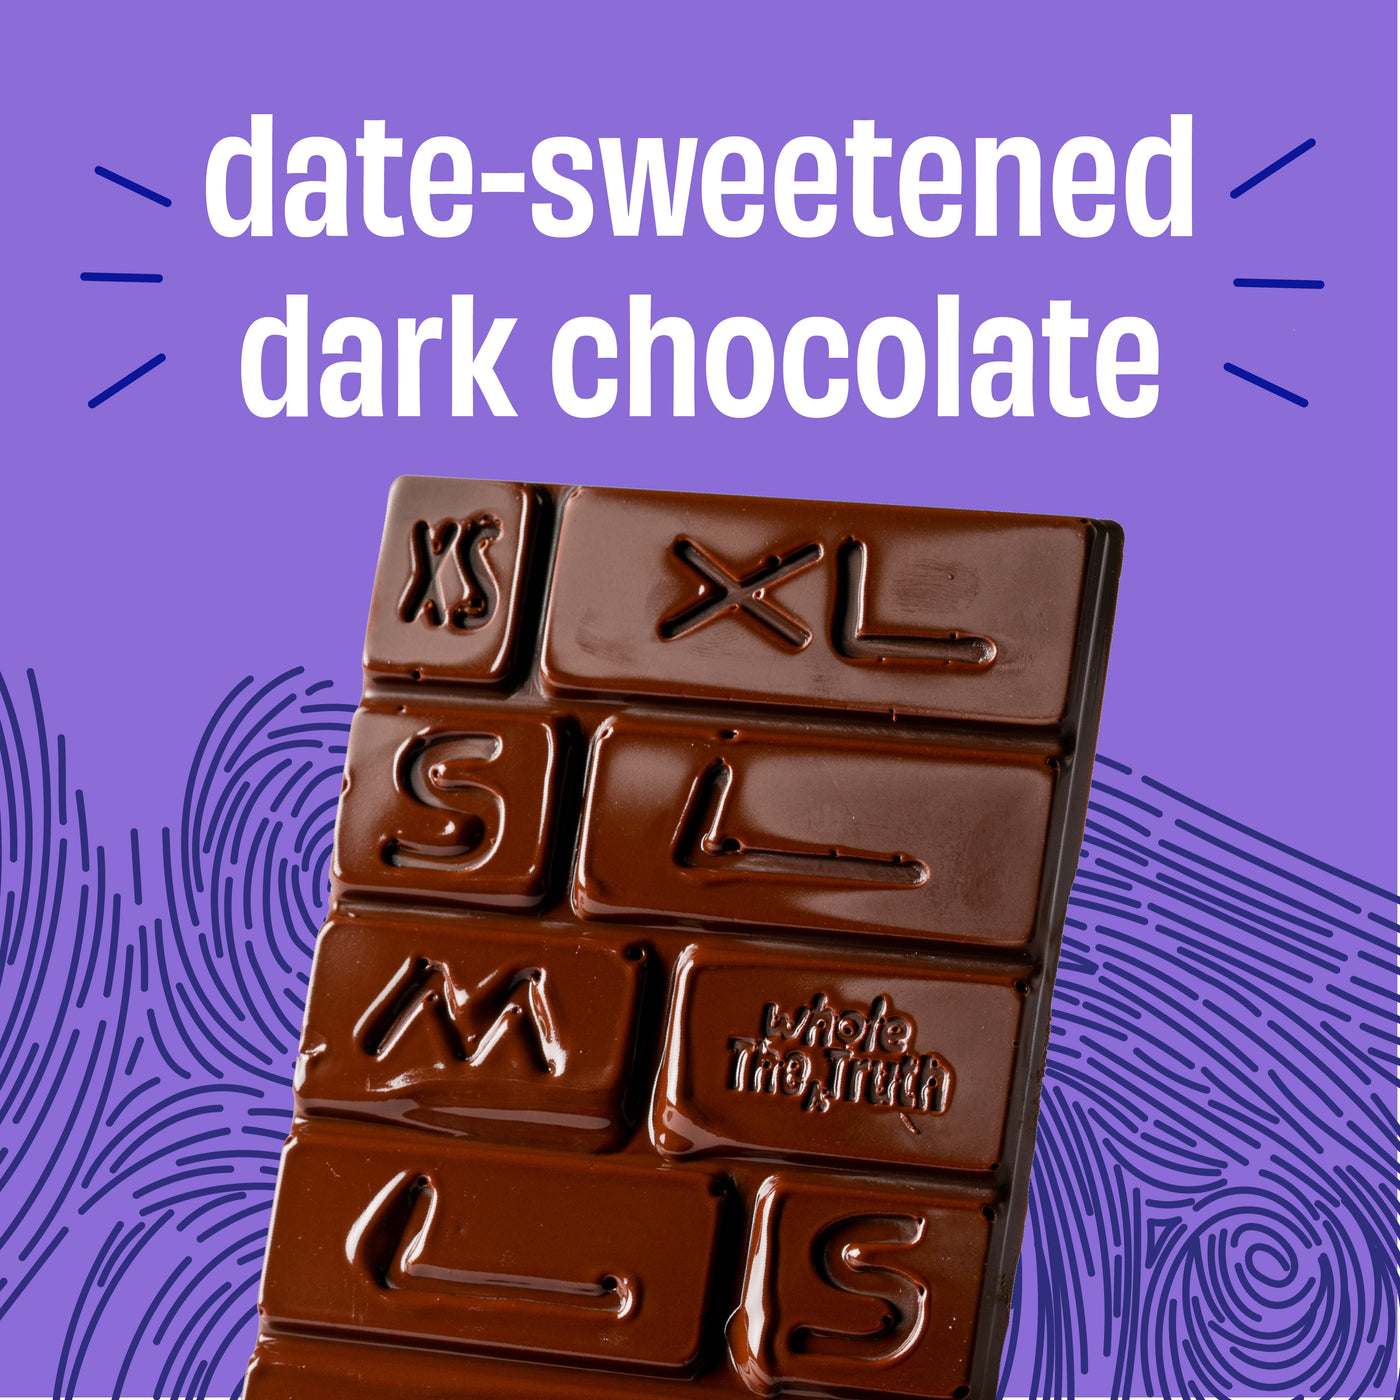 Sugar Free Dark Chocolates with 71% Cocoa & 29% Dates | Pack of 2 (80g each)